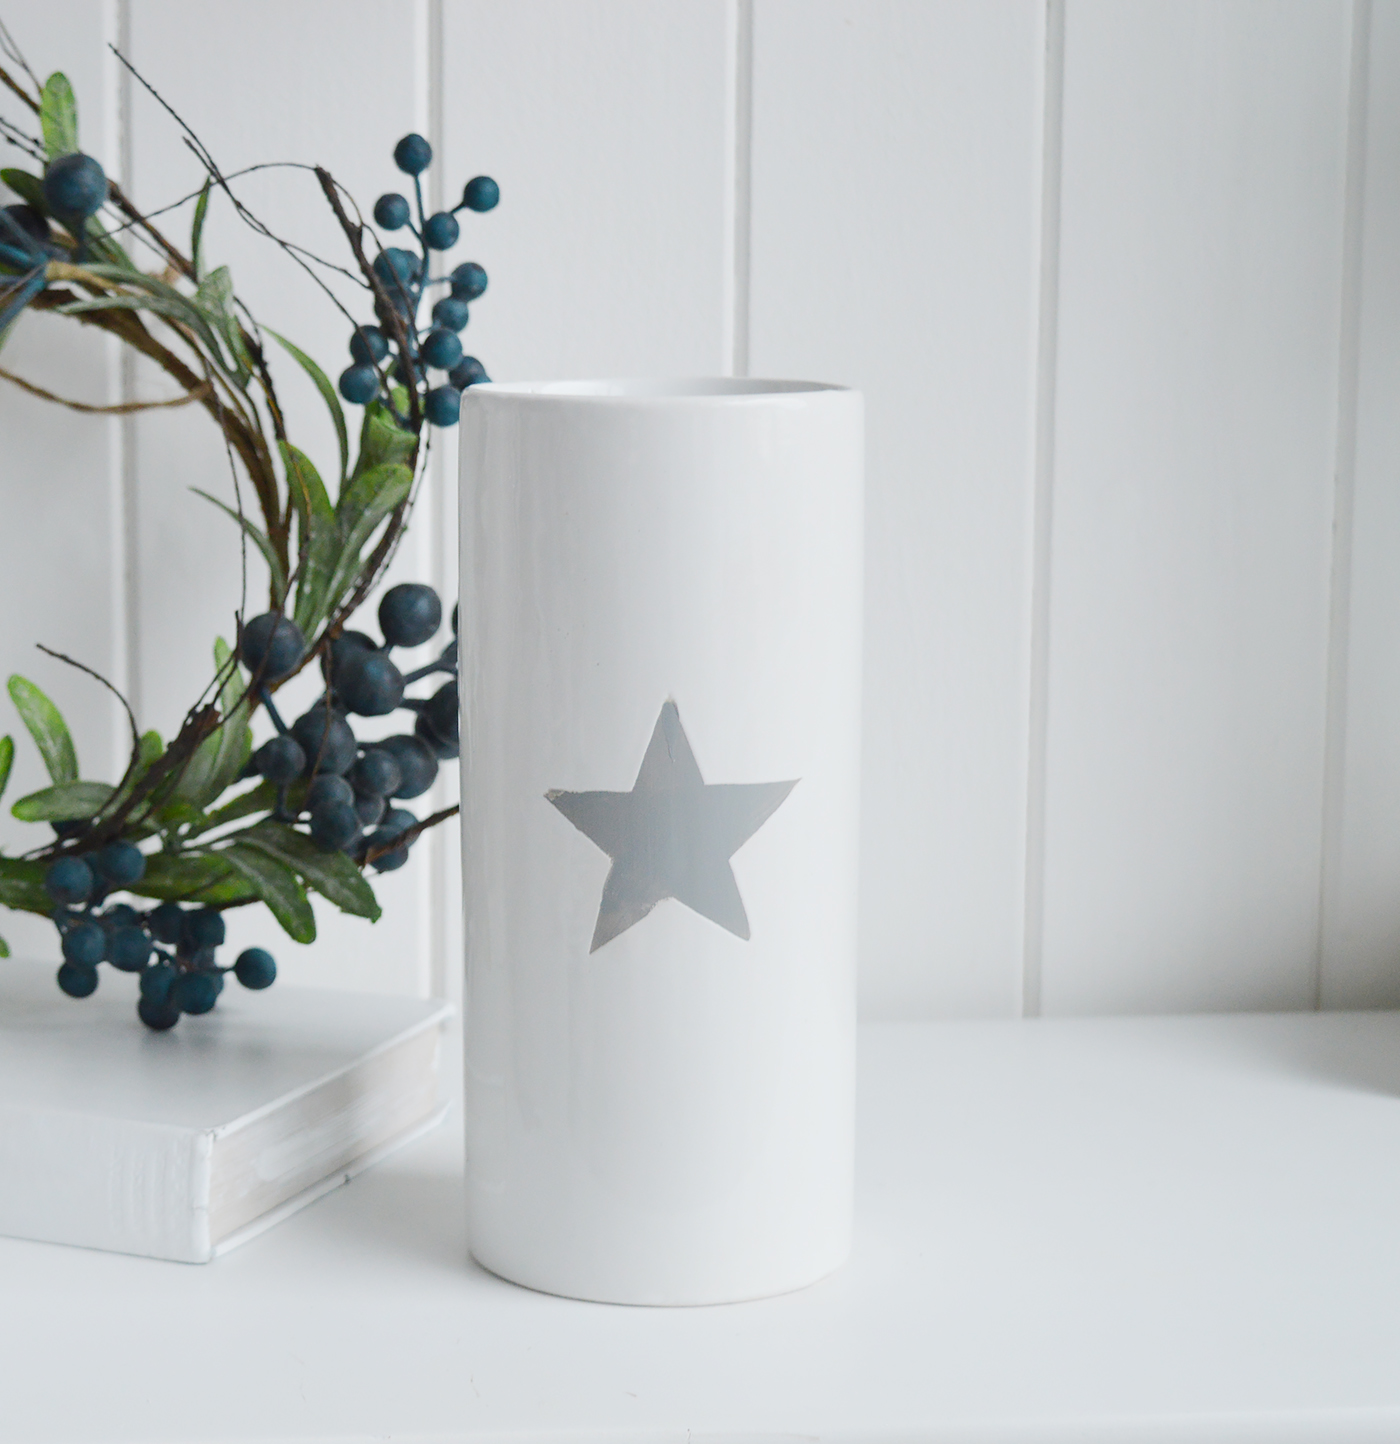 White ceramic vase with grey star and bowl for white homes and interiors